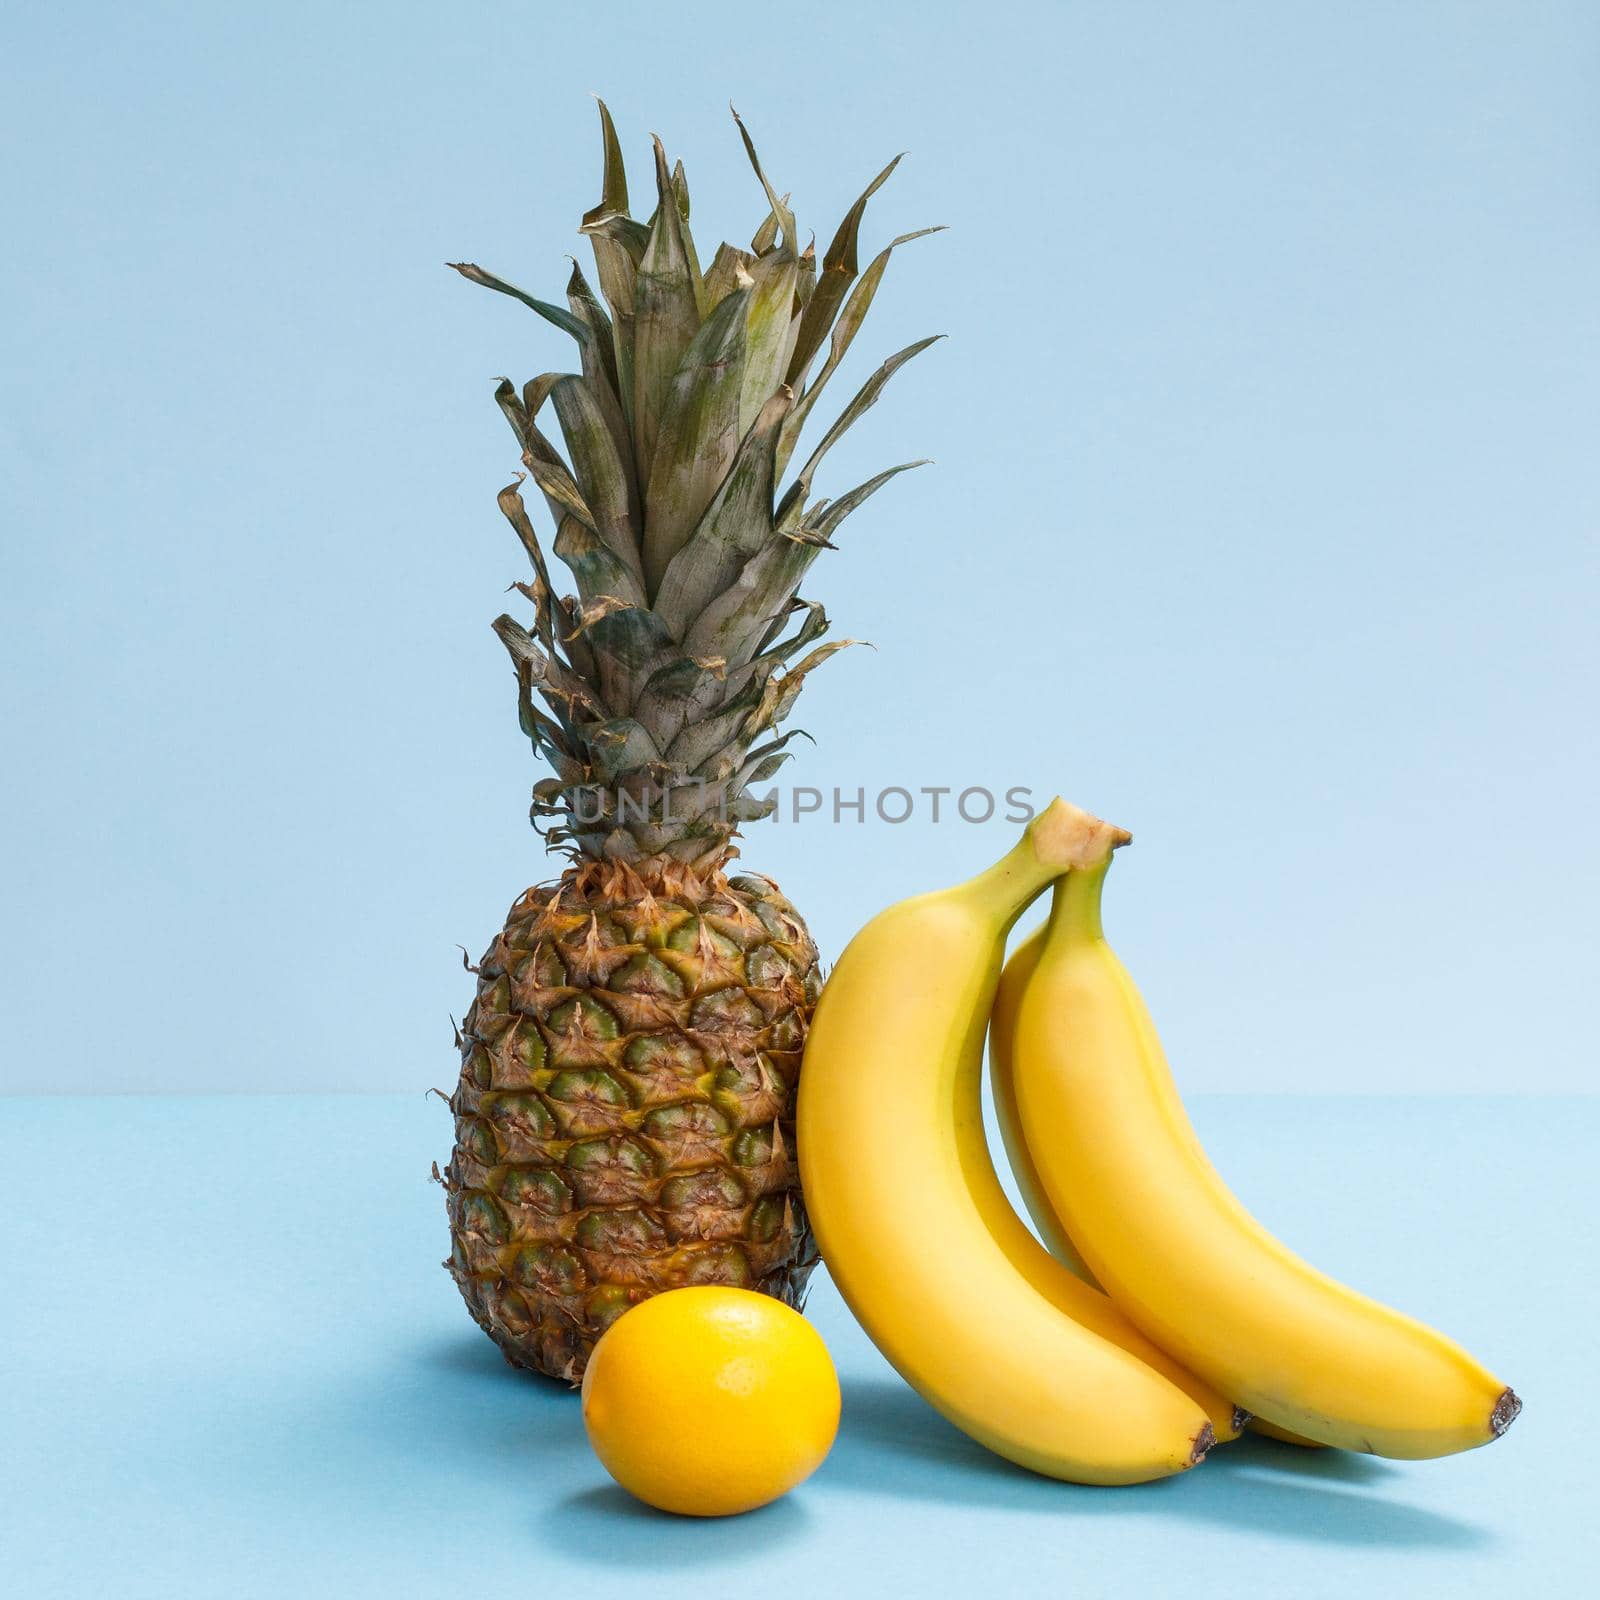 Natural composition with tropical fruits. Fresh pineapple, bananas and a lemon on the blue background.